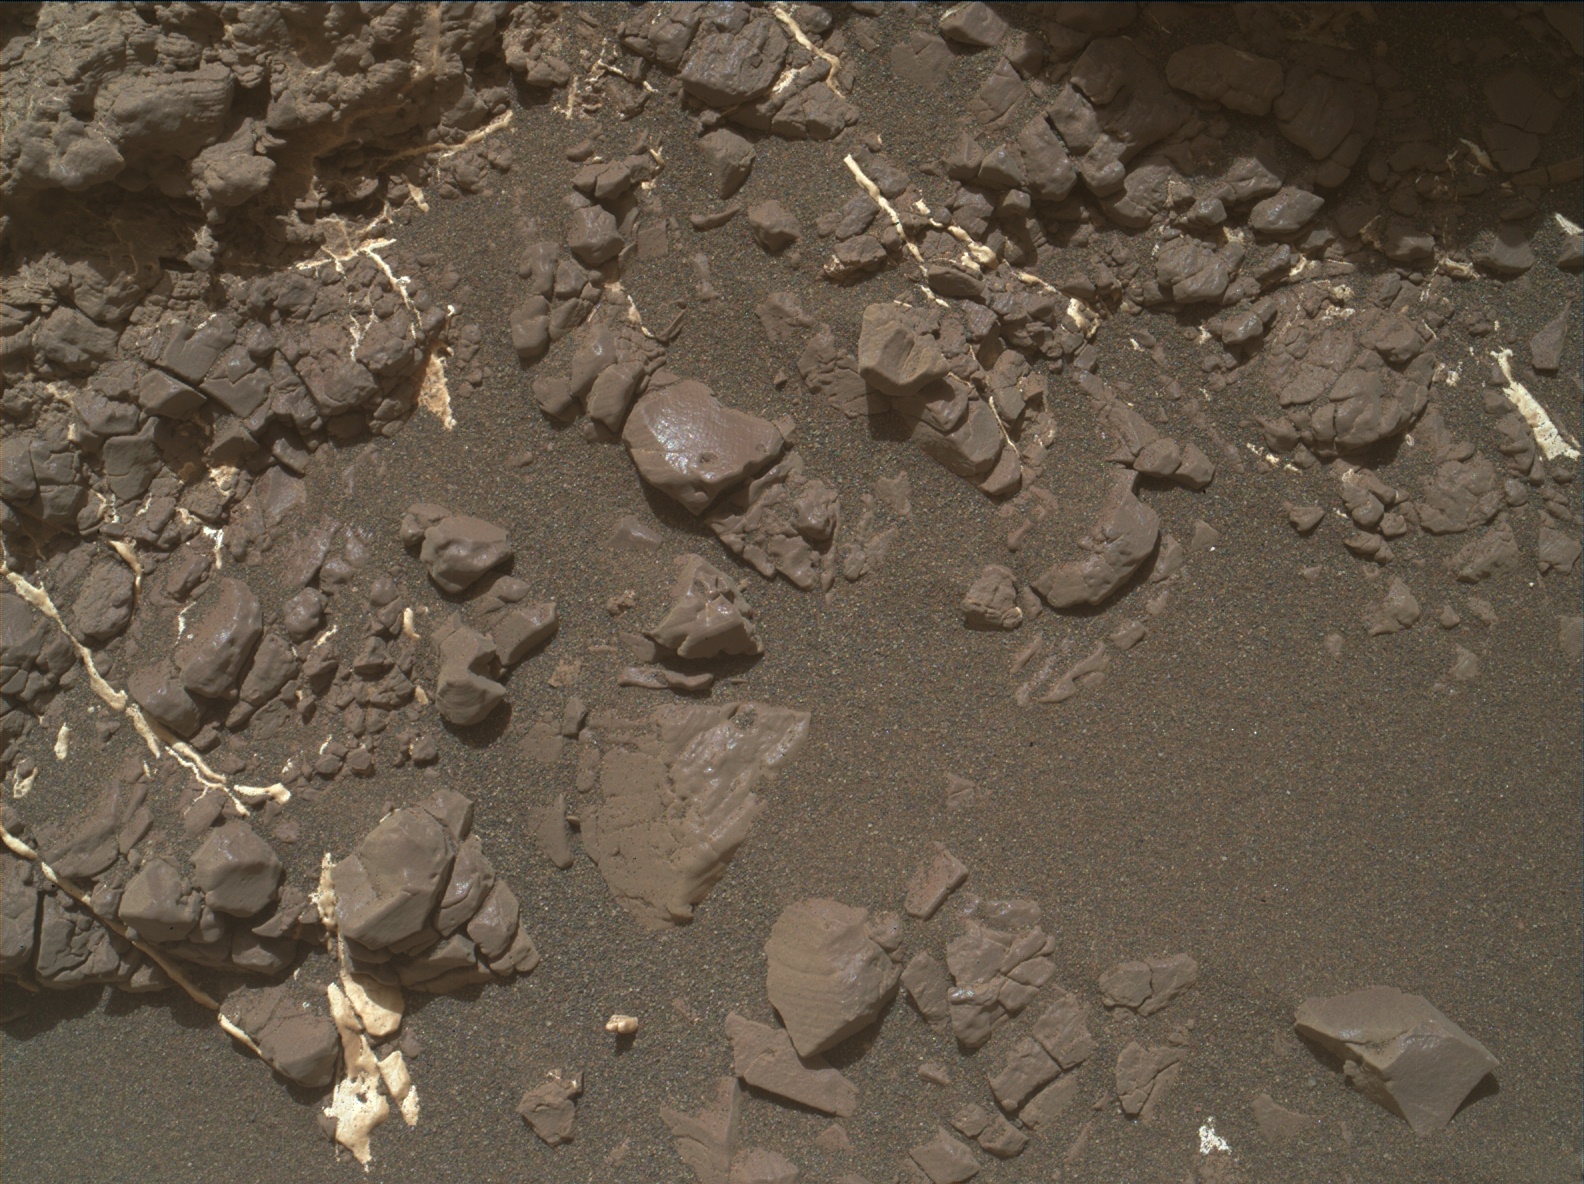 Nasa's Mars rover Curiosity acquired this image using its Mars Hand Lens Imager (MAHLI) on Sol 2453